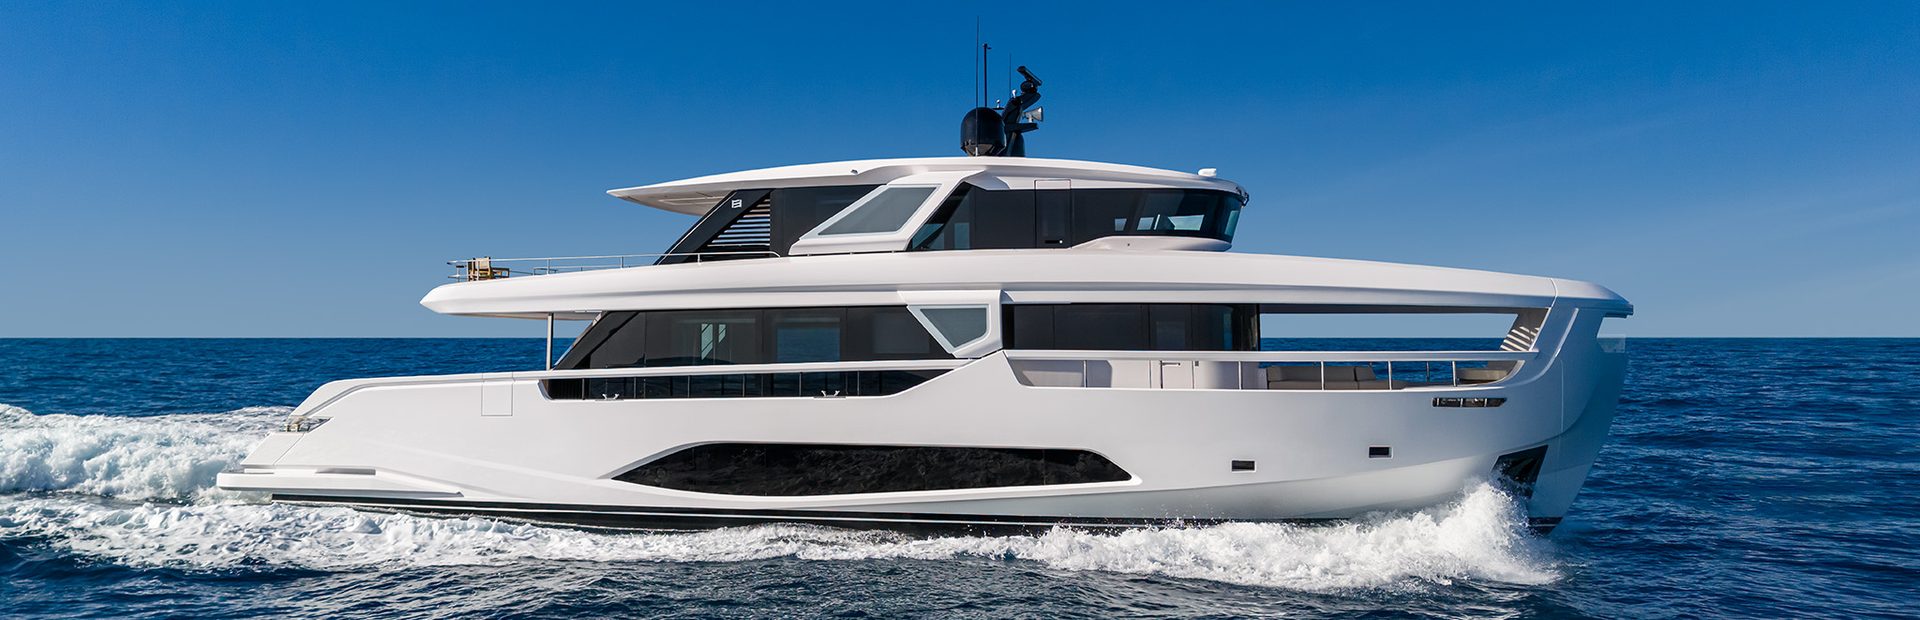 InFYnito 90 Yacht